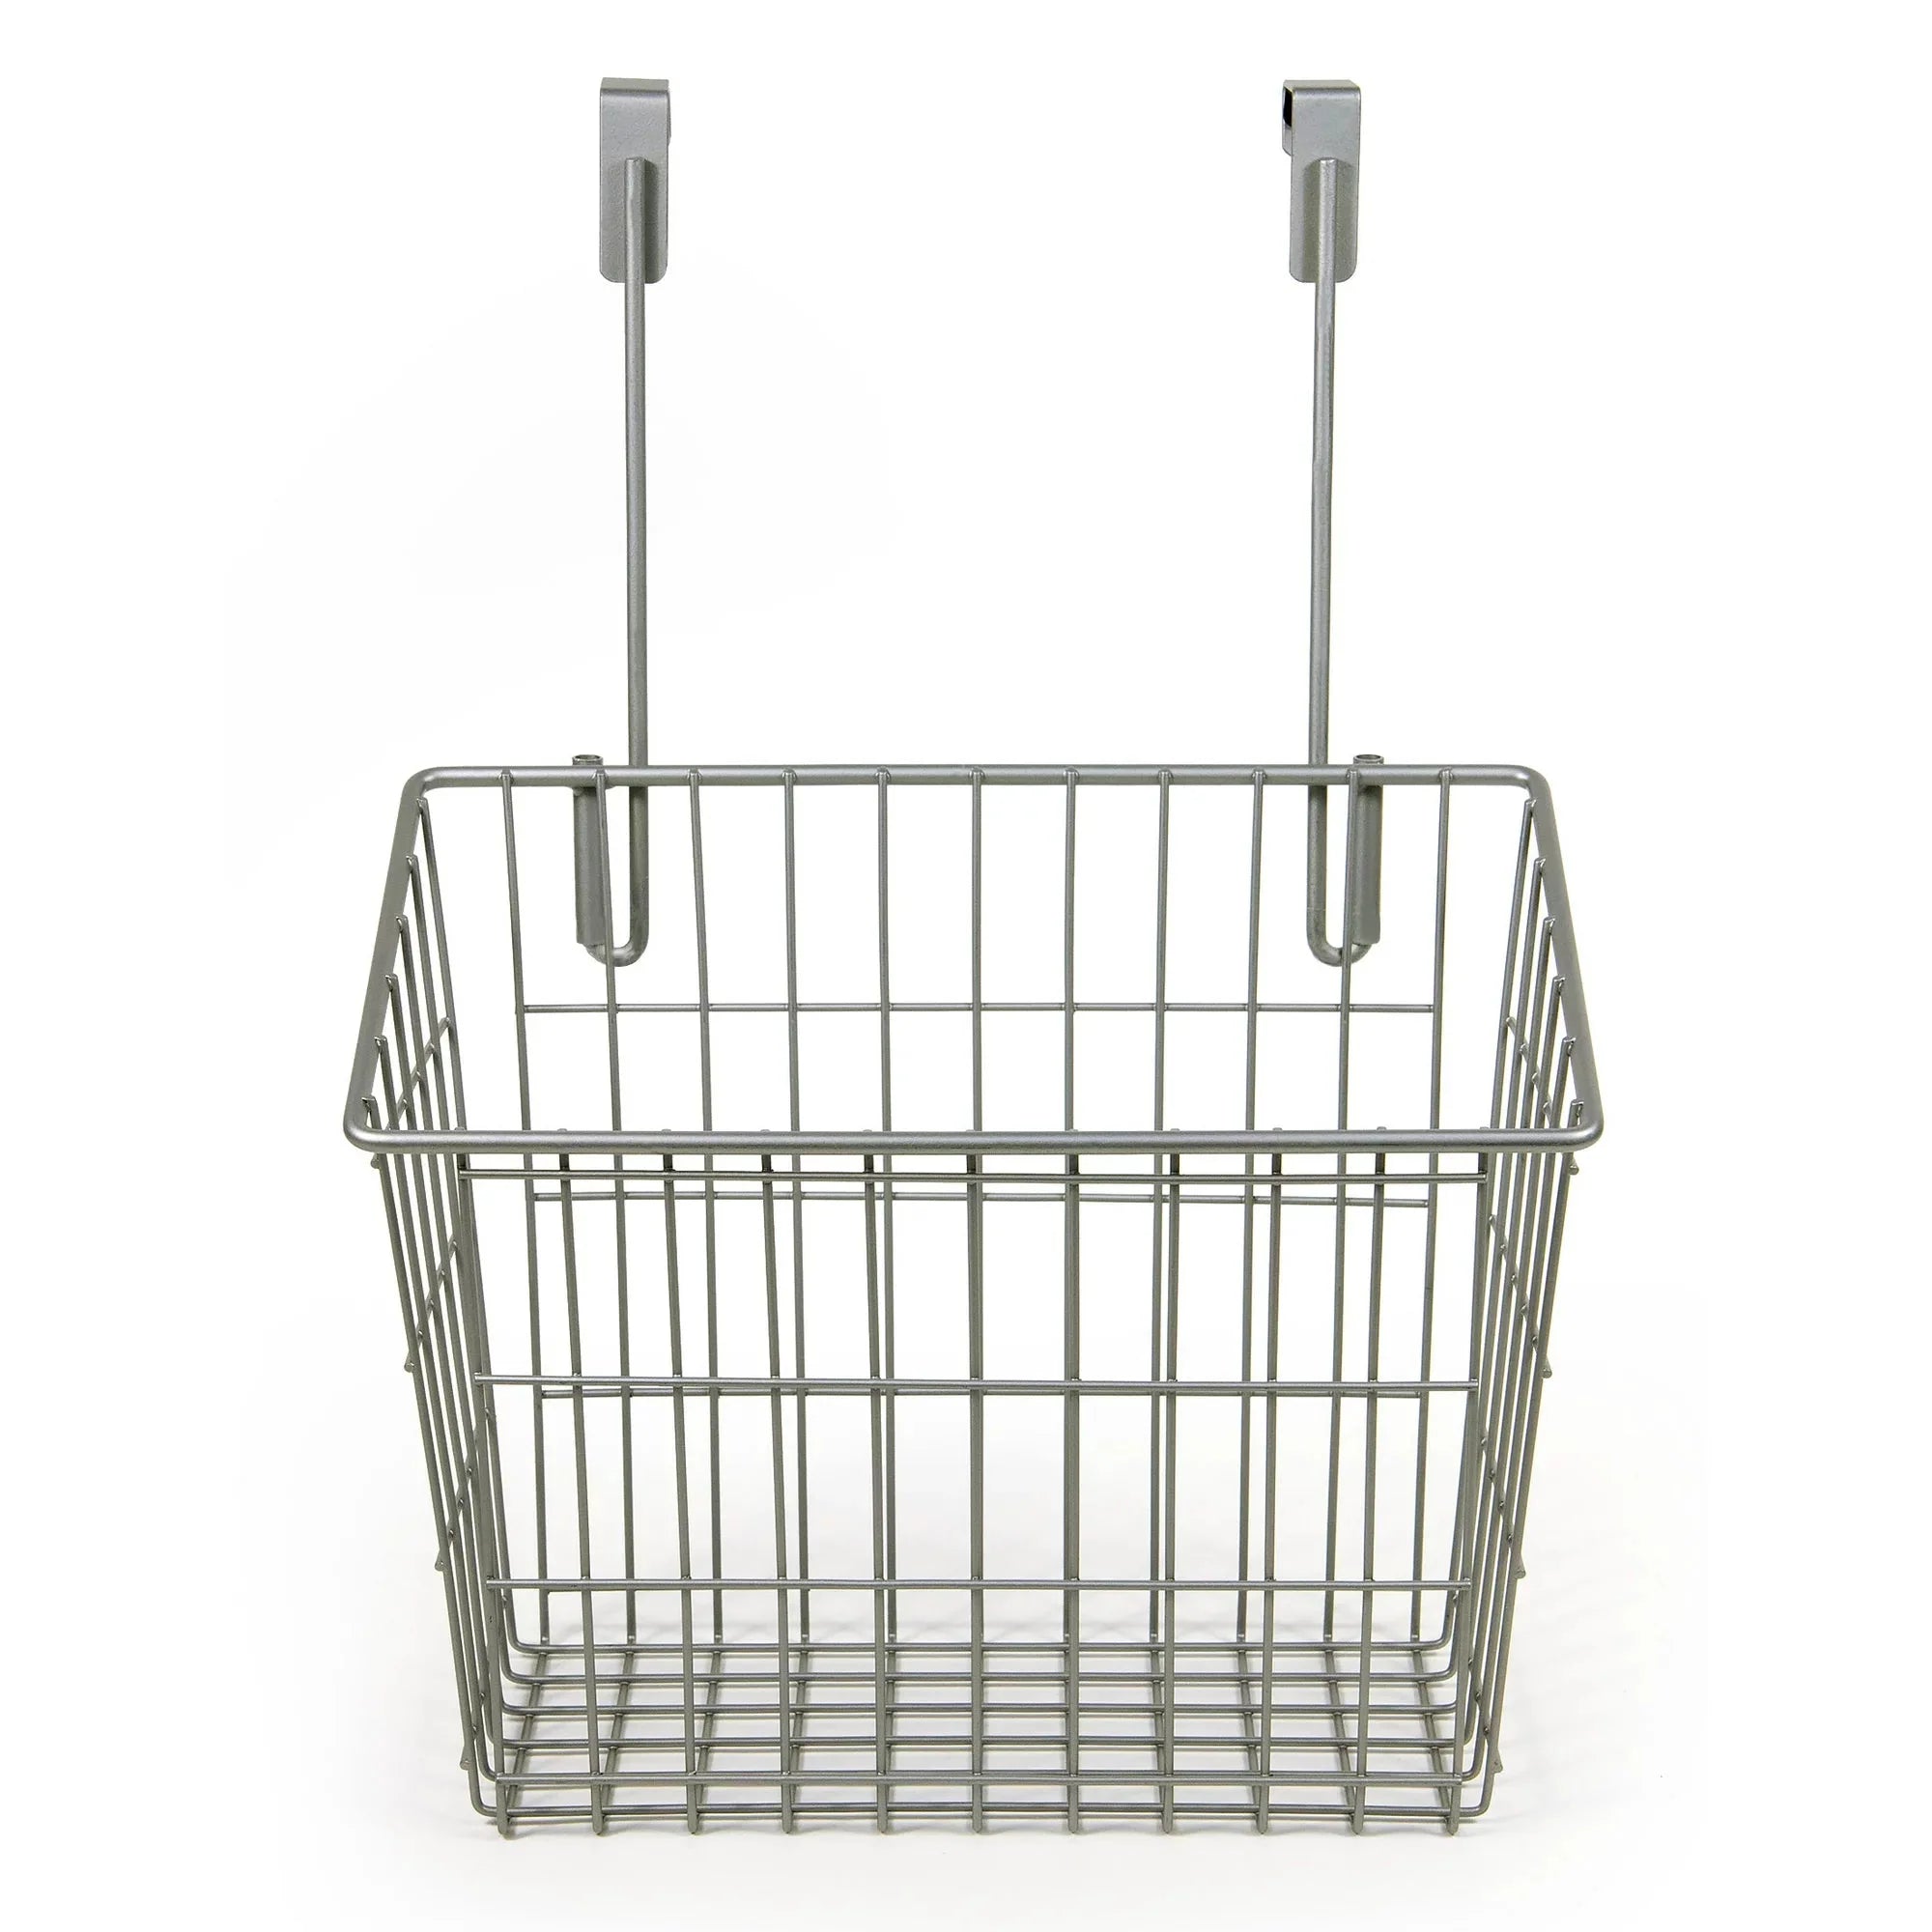 Wholesale prices with free shipping all over United States Mainstays Over the Cabinet Grid Basket, Medium - Steven Deals